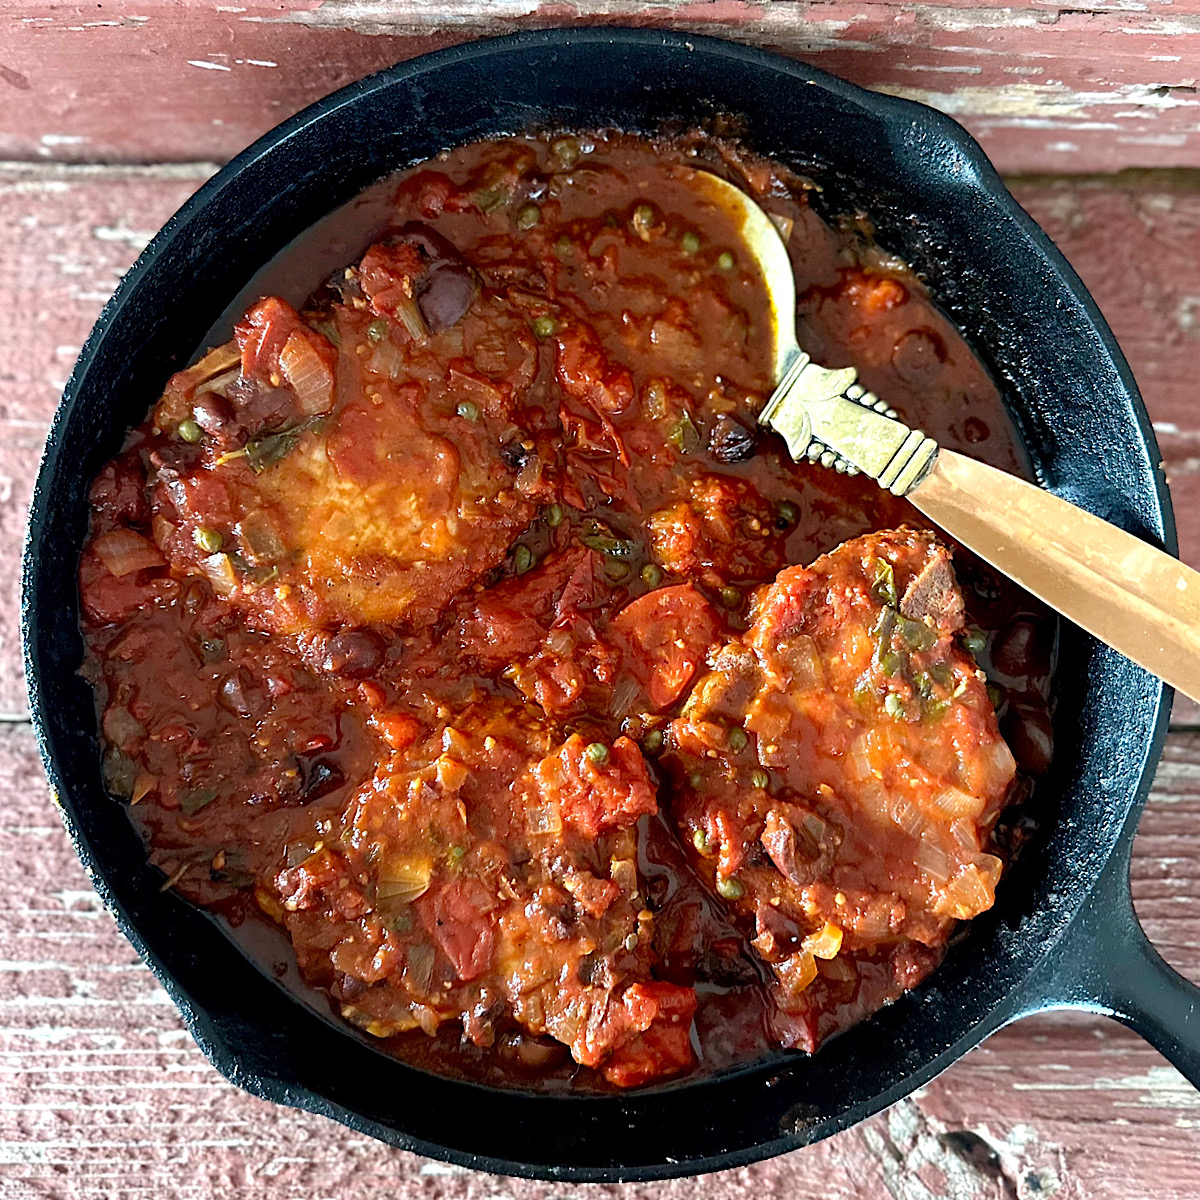 Pork chops in a skillet smothered with puttanesca sauce.